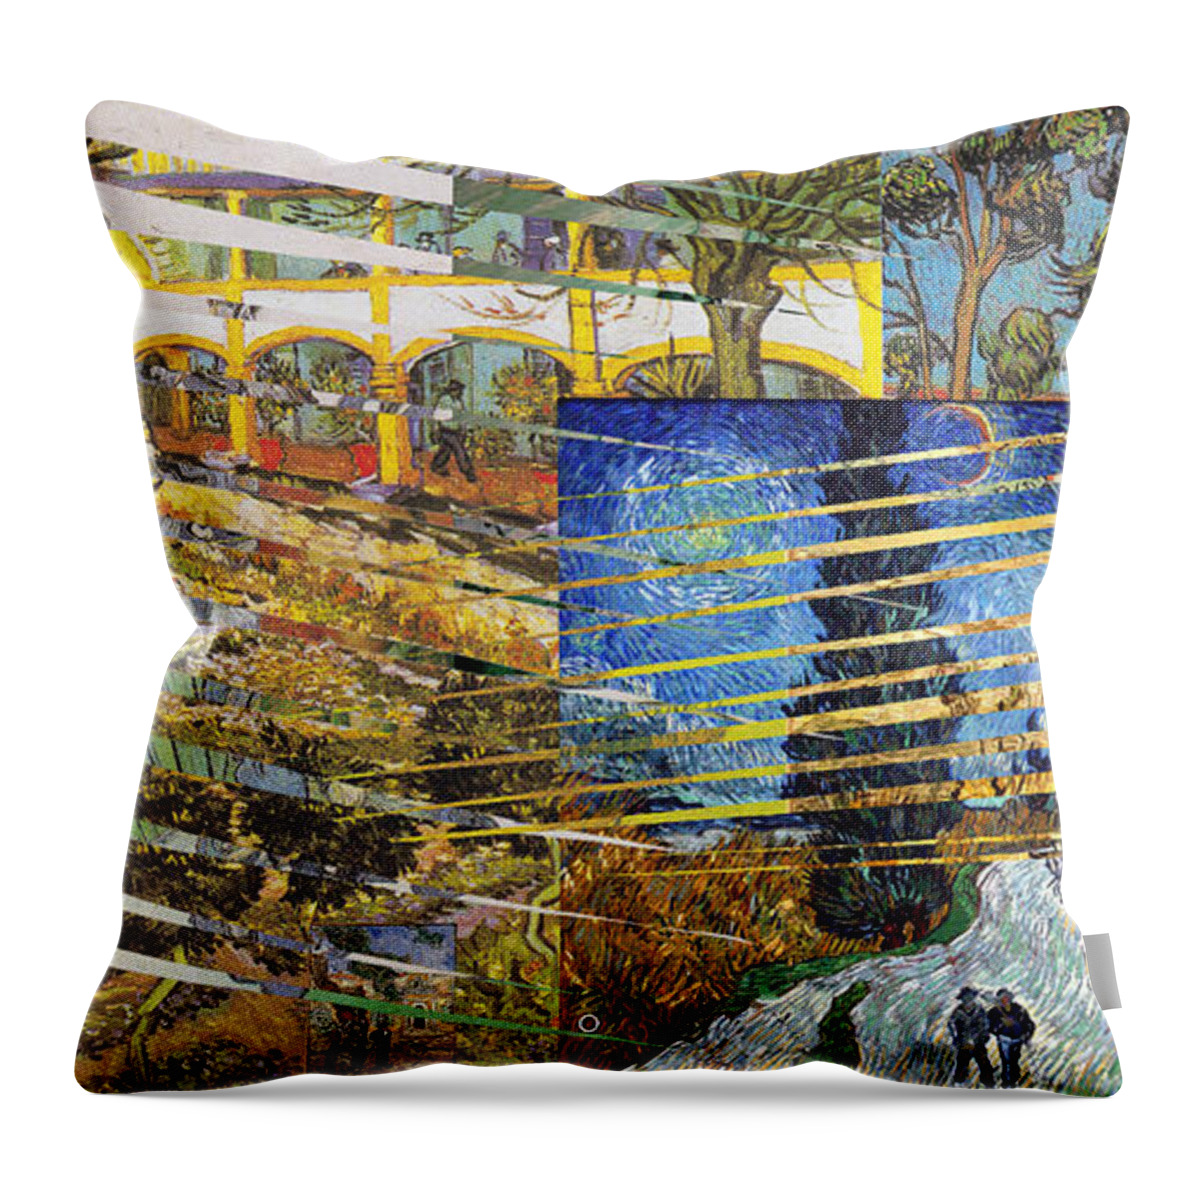 Abstract In The Living Room Throw Pillow featuring the digital art Van Gogh Mural Il by David Bridburg